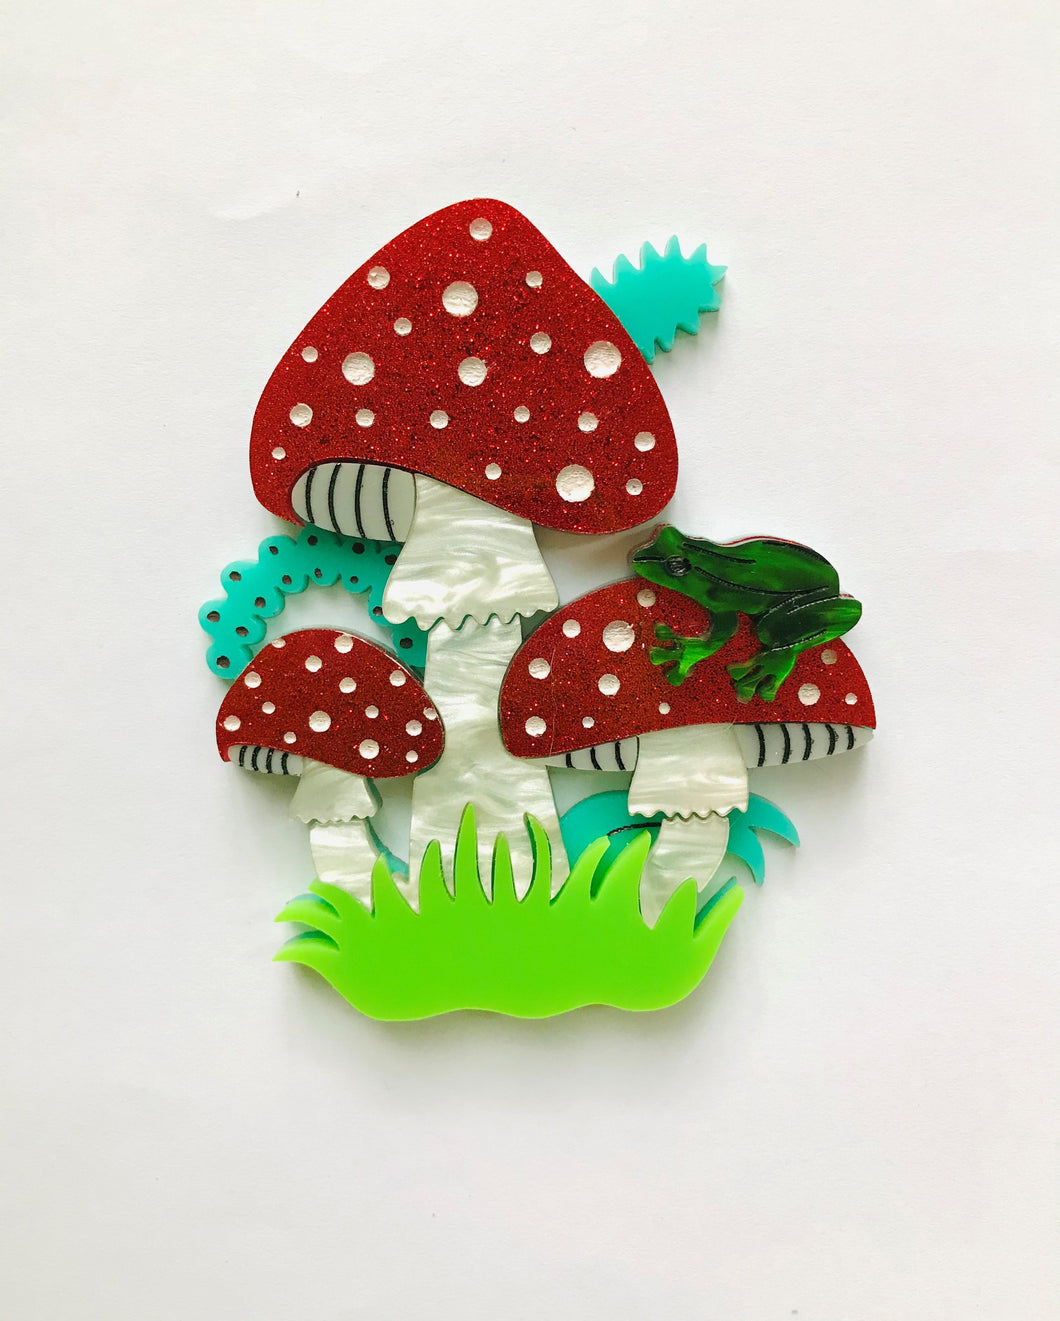 Large Magical Toadstool Brooch in Handpainted Red Glitter